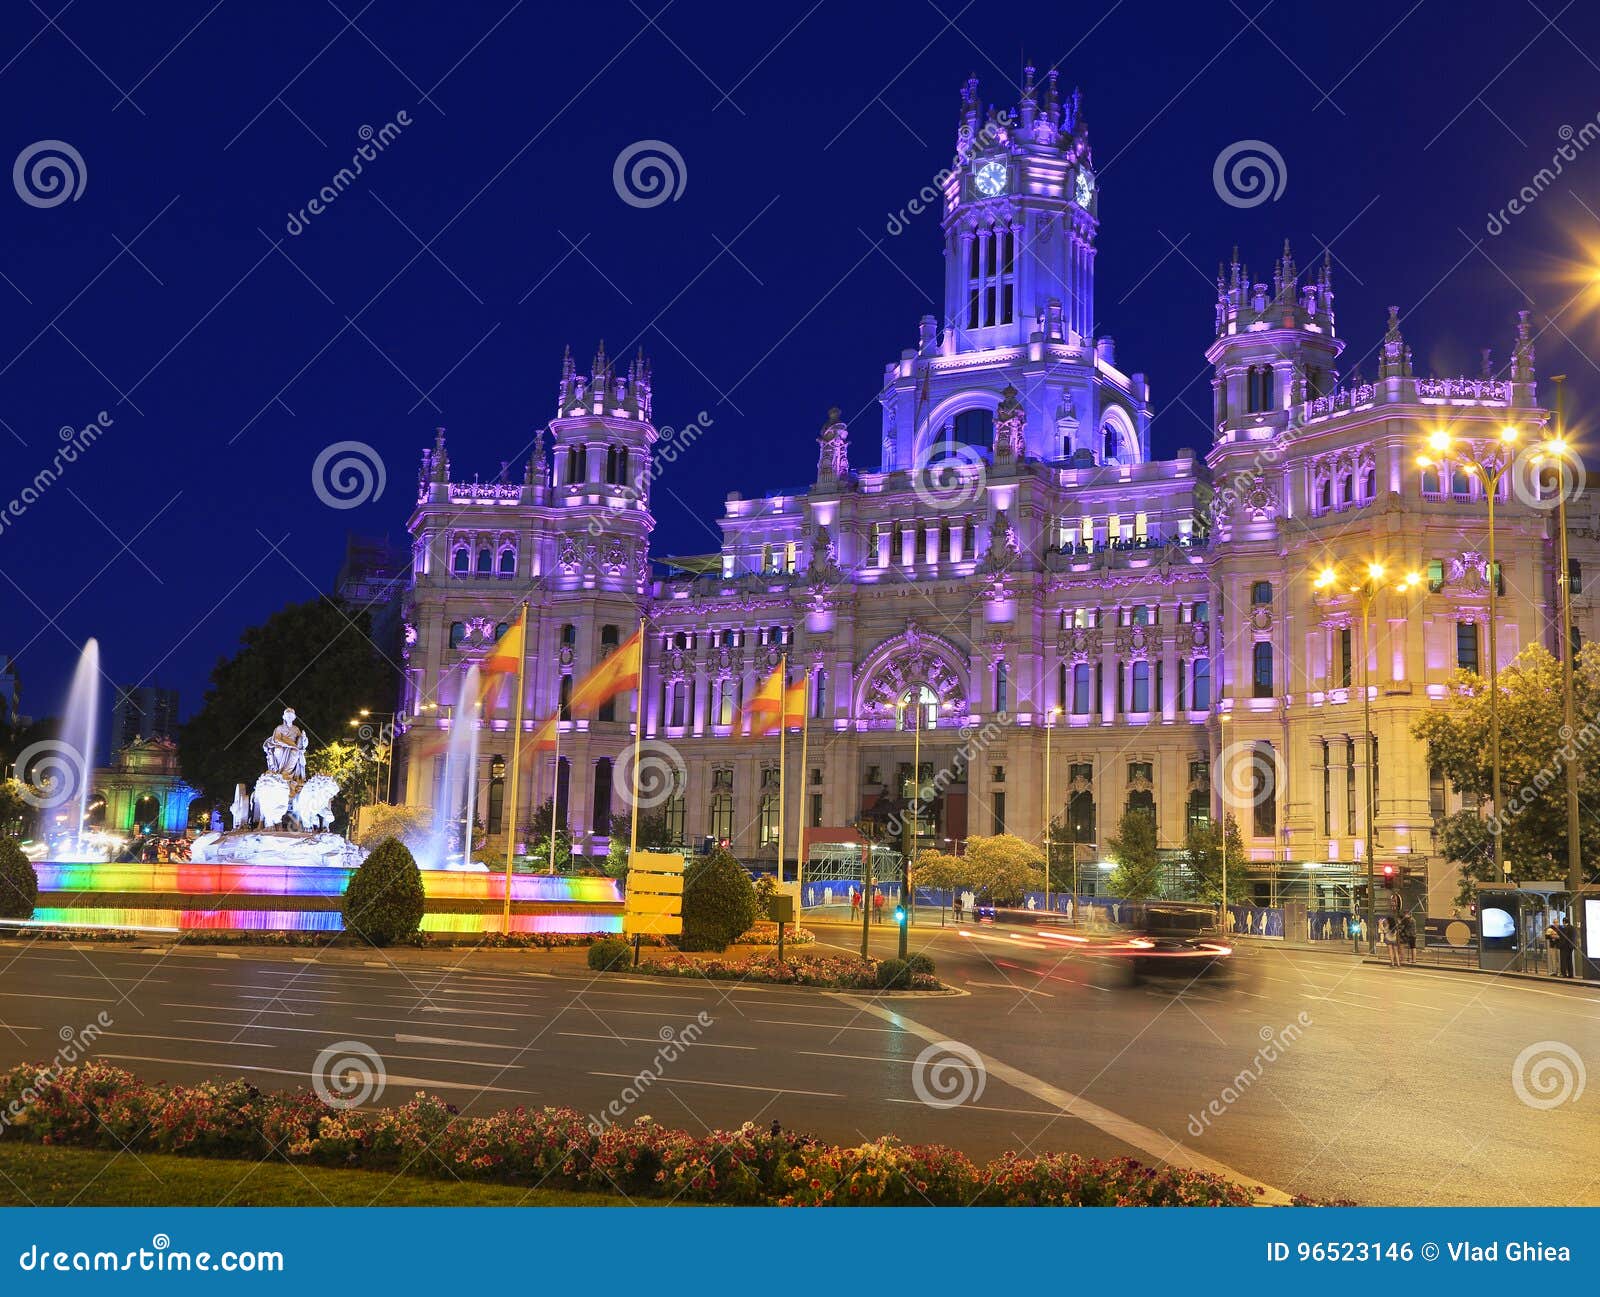 the cybele palace and fountain illuminated at night in madrid, spain